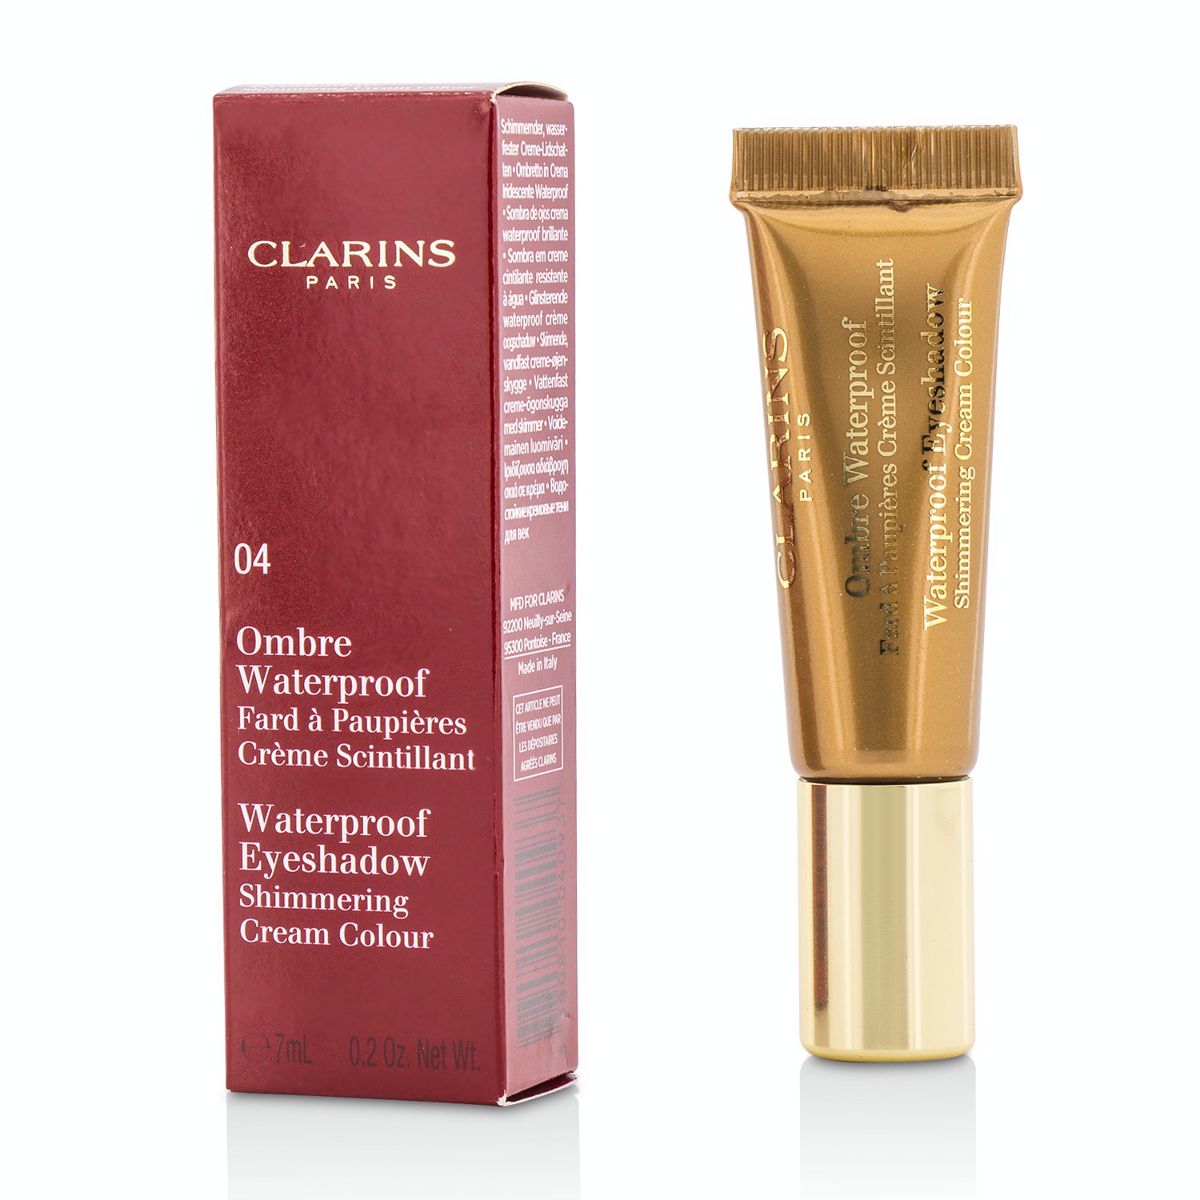 Ombre Waterproof Eyeshadow Shimmering Cream Colour - #04 Copper Brown Clarins Image